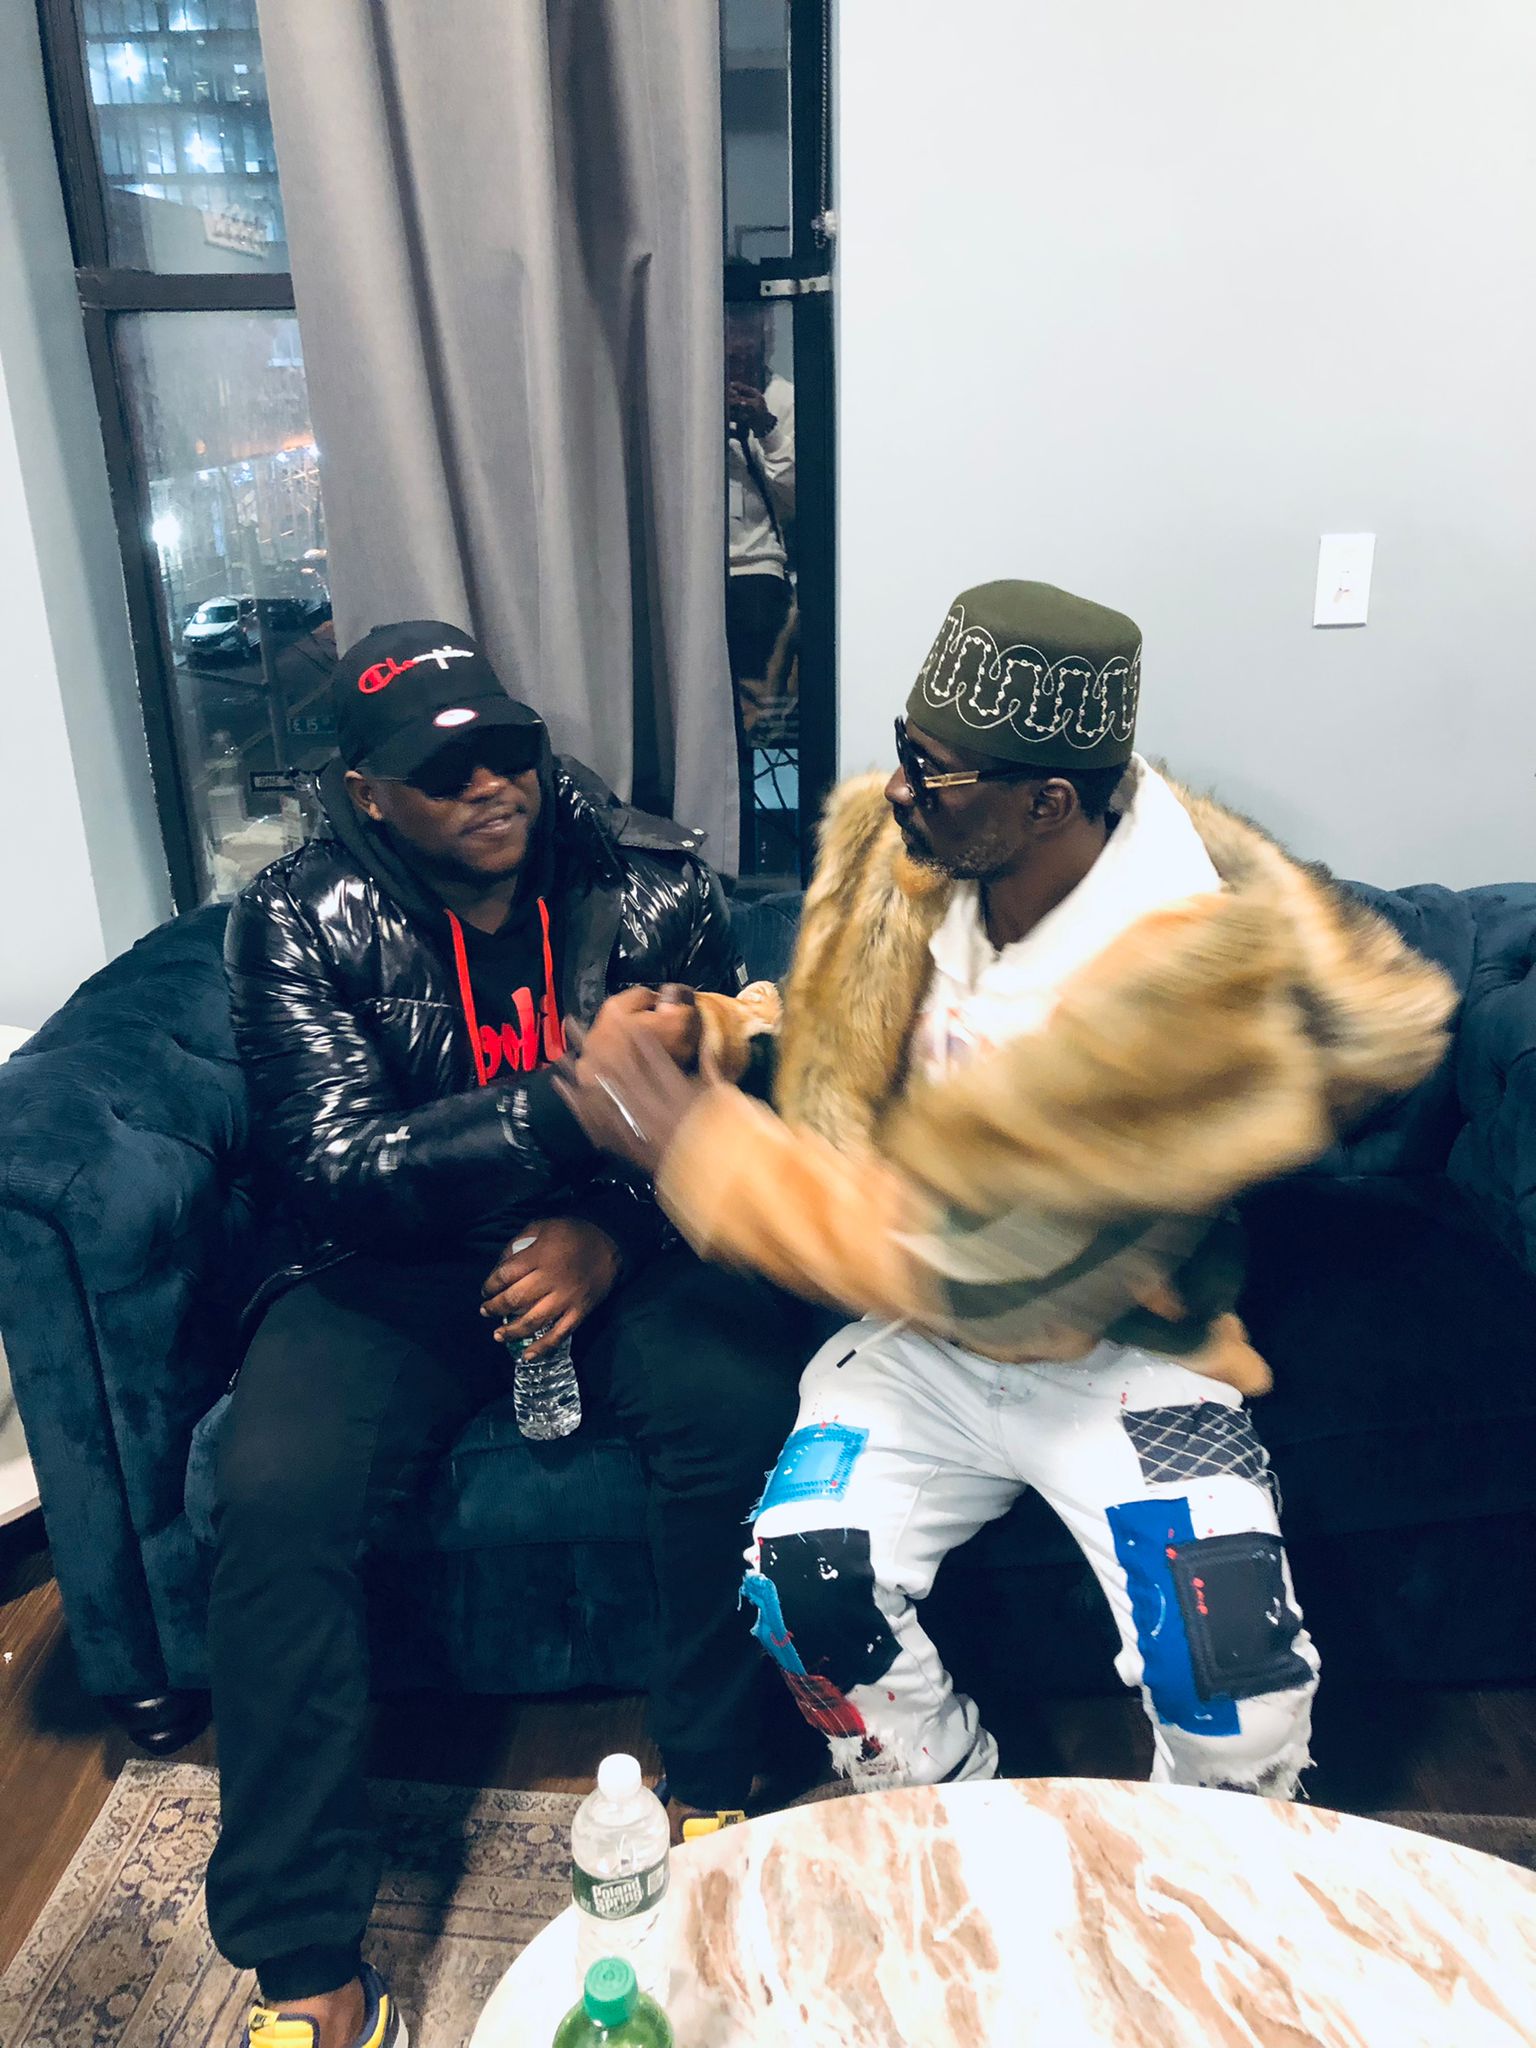 Waliy AbouNamarr Secures Feature With Medikal.